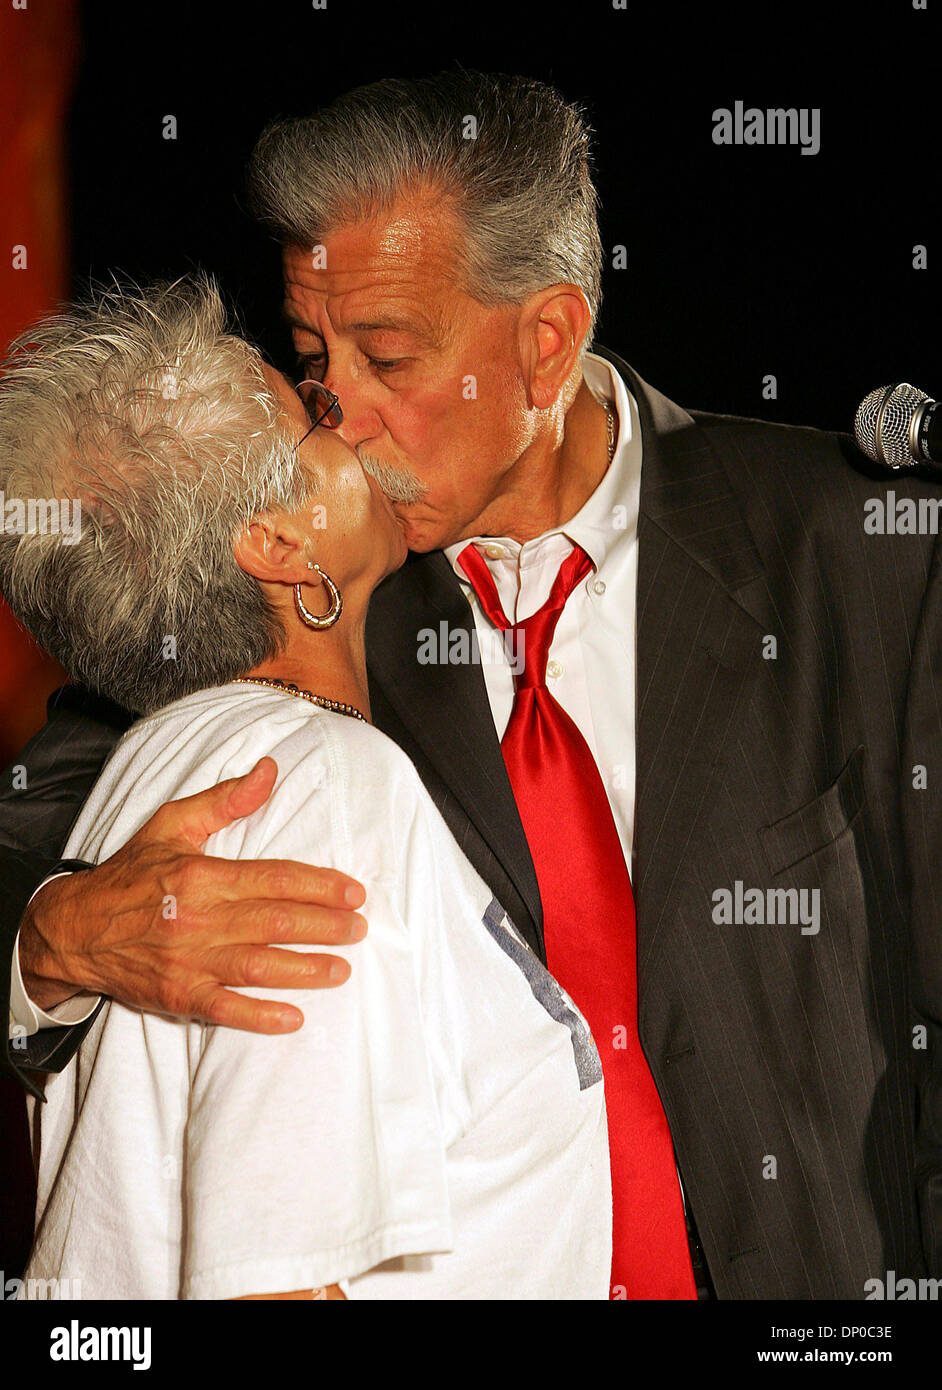 Mar 07, 2006; San Antonio, TX, USA; Texas Primary Elections 2006: County commissioner, Pct. 2 candidate Enrique Barrera kisses his wife, Leticia, as he gives a concession speach Tuesday, March 7, 2006 at his campaign headquarters. Barrera lost his bid to incumbent Paul Elizondo.  Mandatory Credit: Photo by BM Sobhani/San Antonio Express-News/ZUMA Press. (©) Copyright 2006 by San An Stock Photo